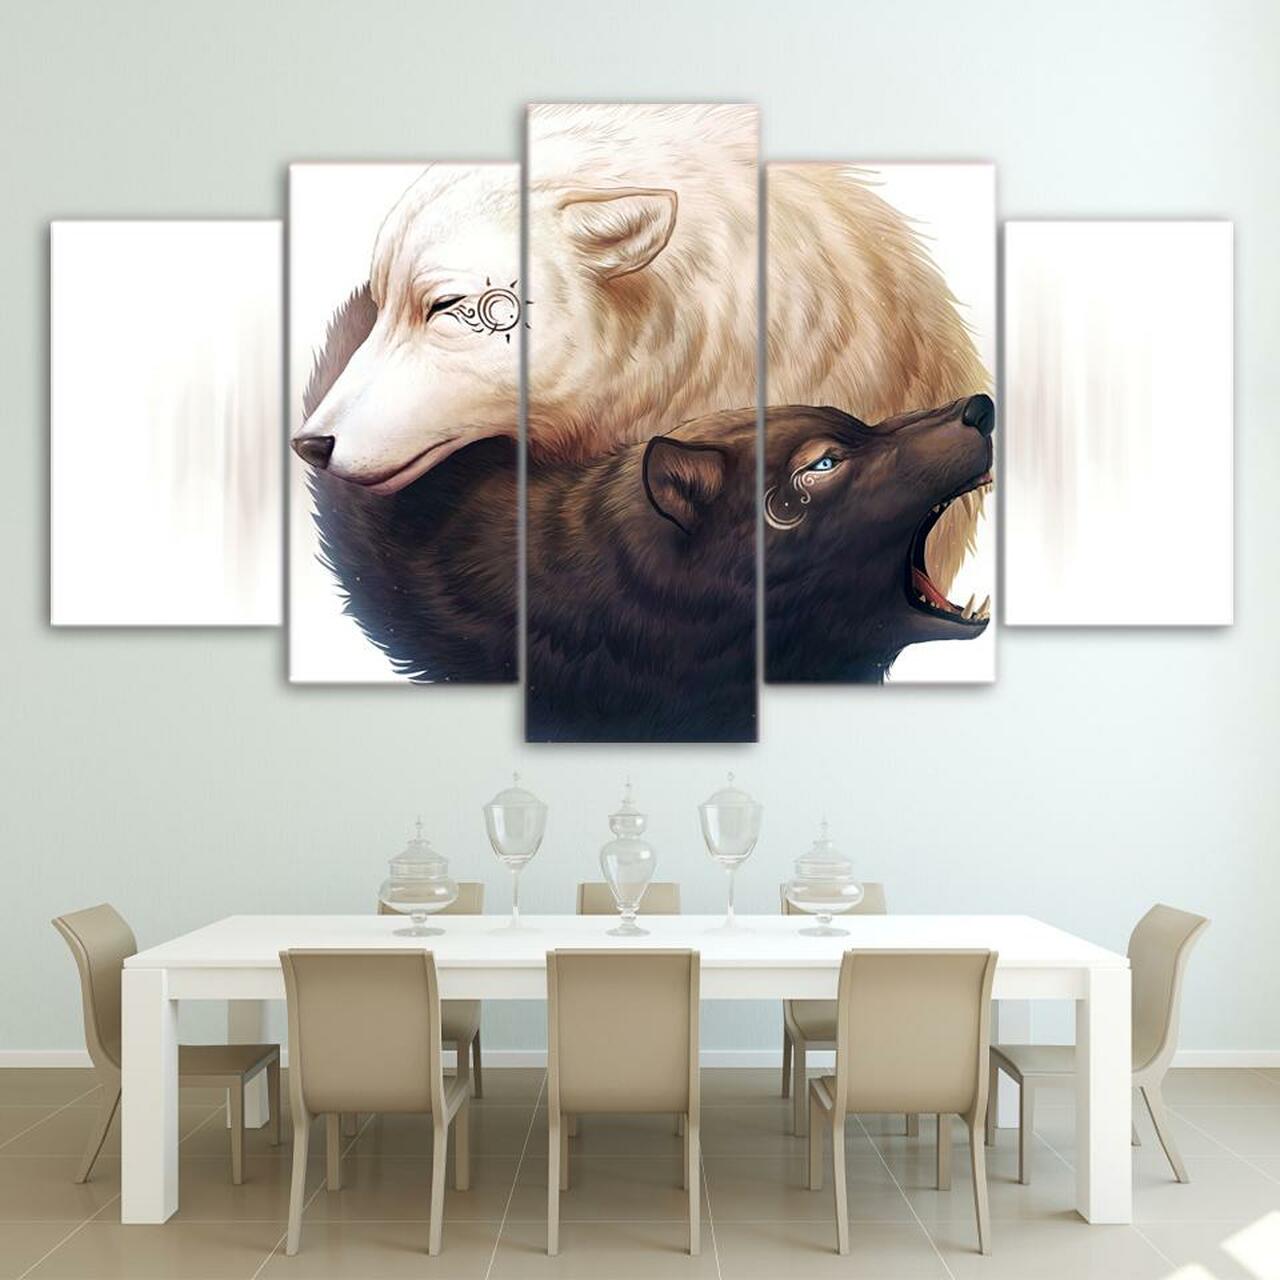 Yin and Yang Wolves 5 Piece Canvas Art Wall Decor